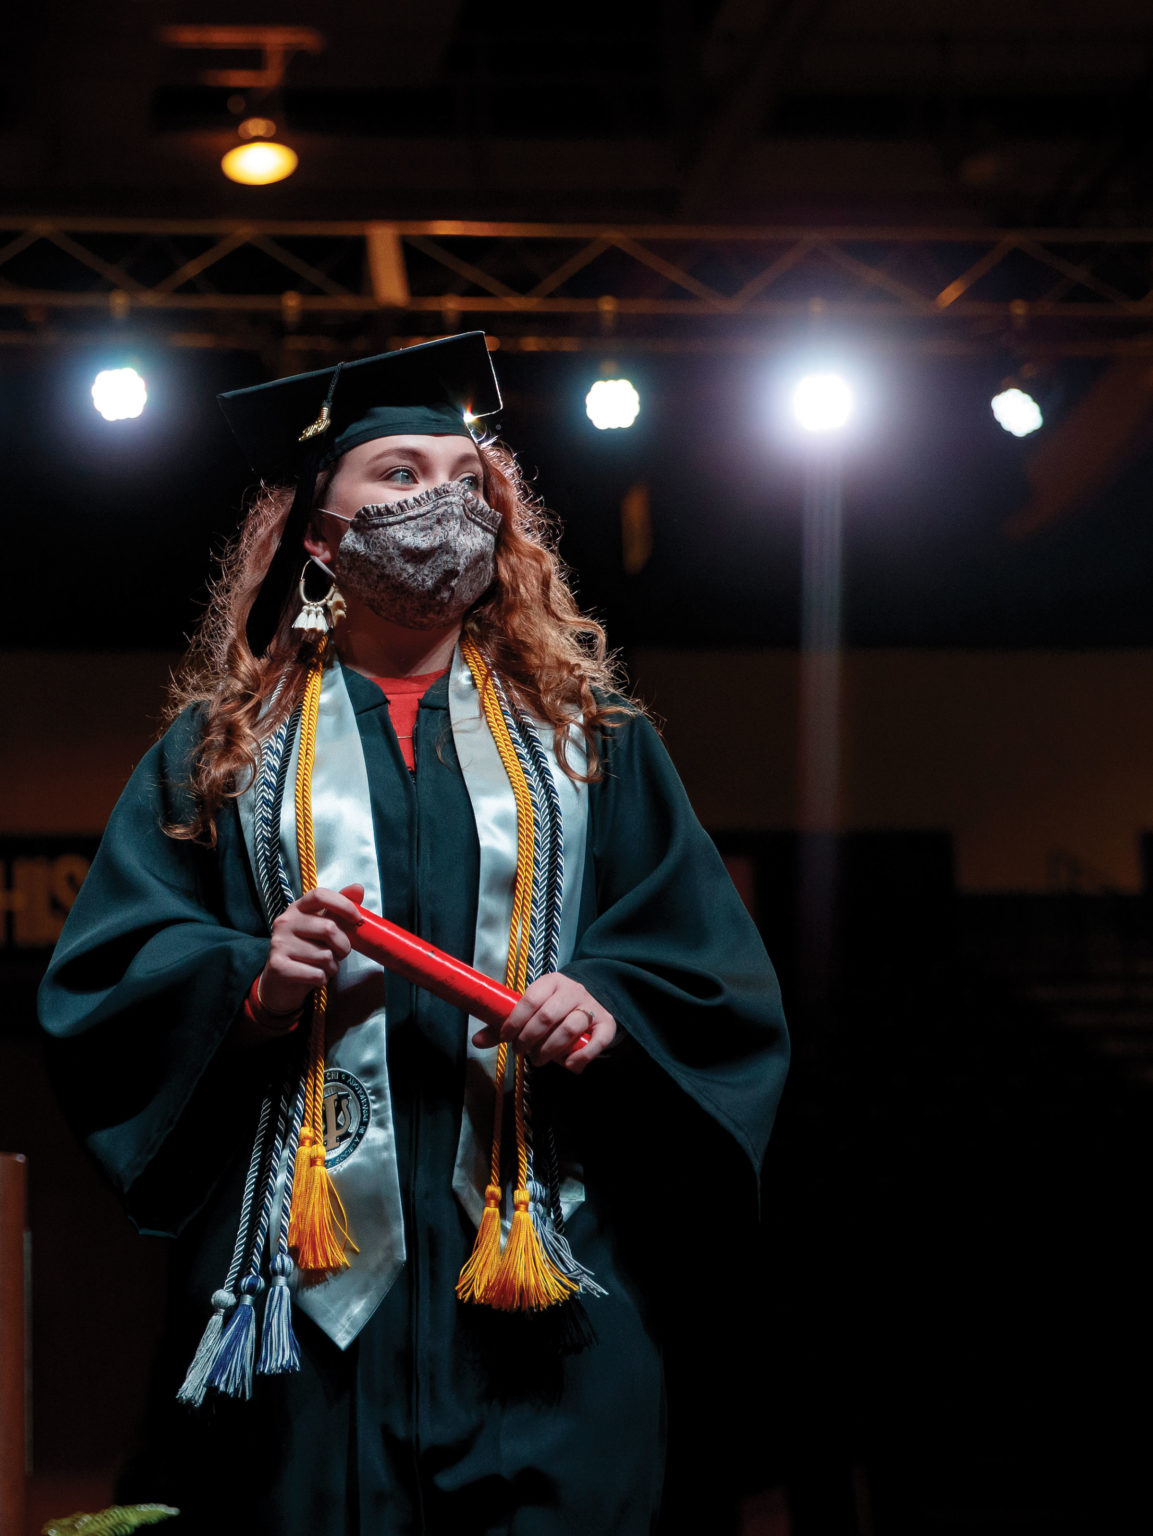 A woman in a cap, gown and face mask walks across a graduation stage with her diploma in hand